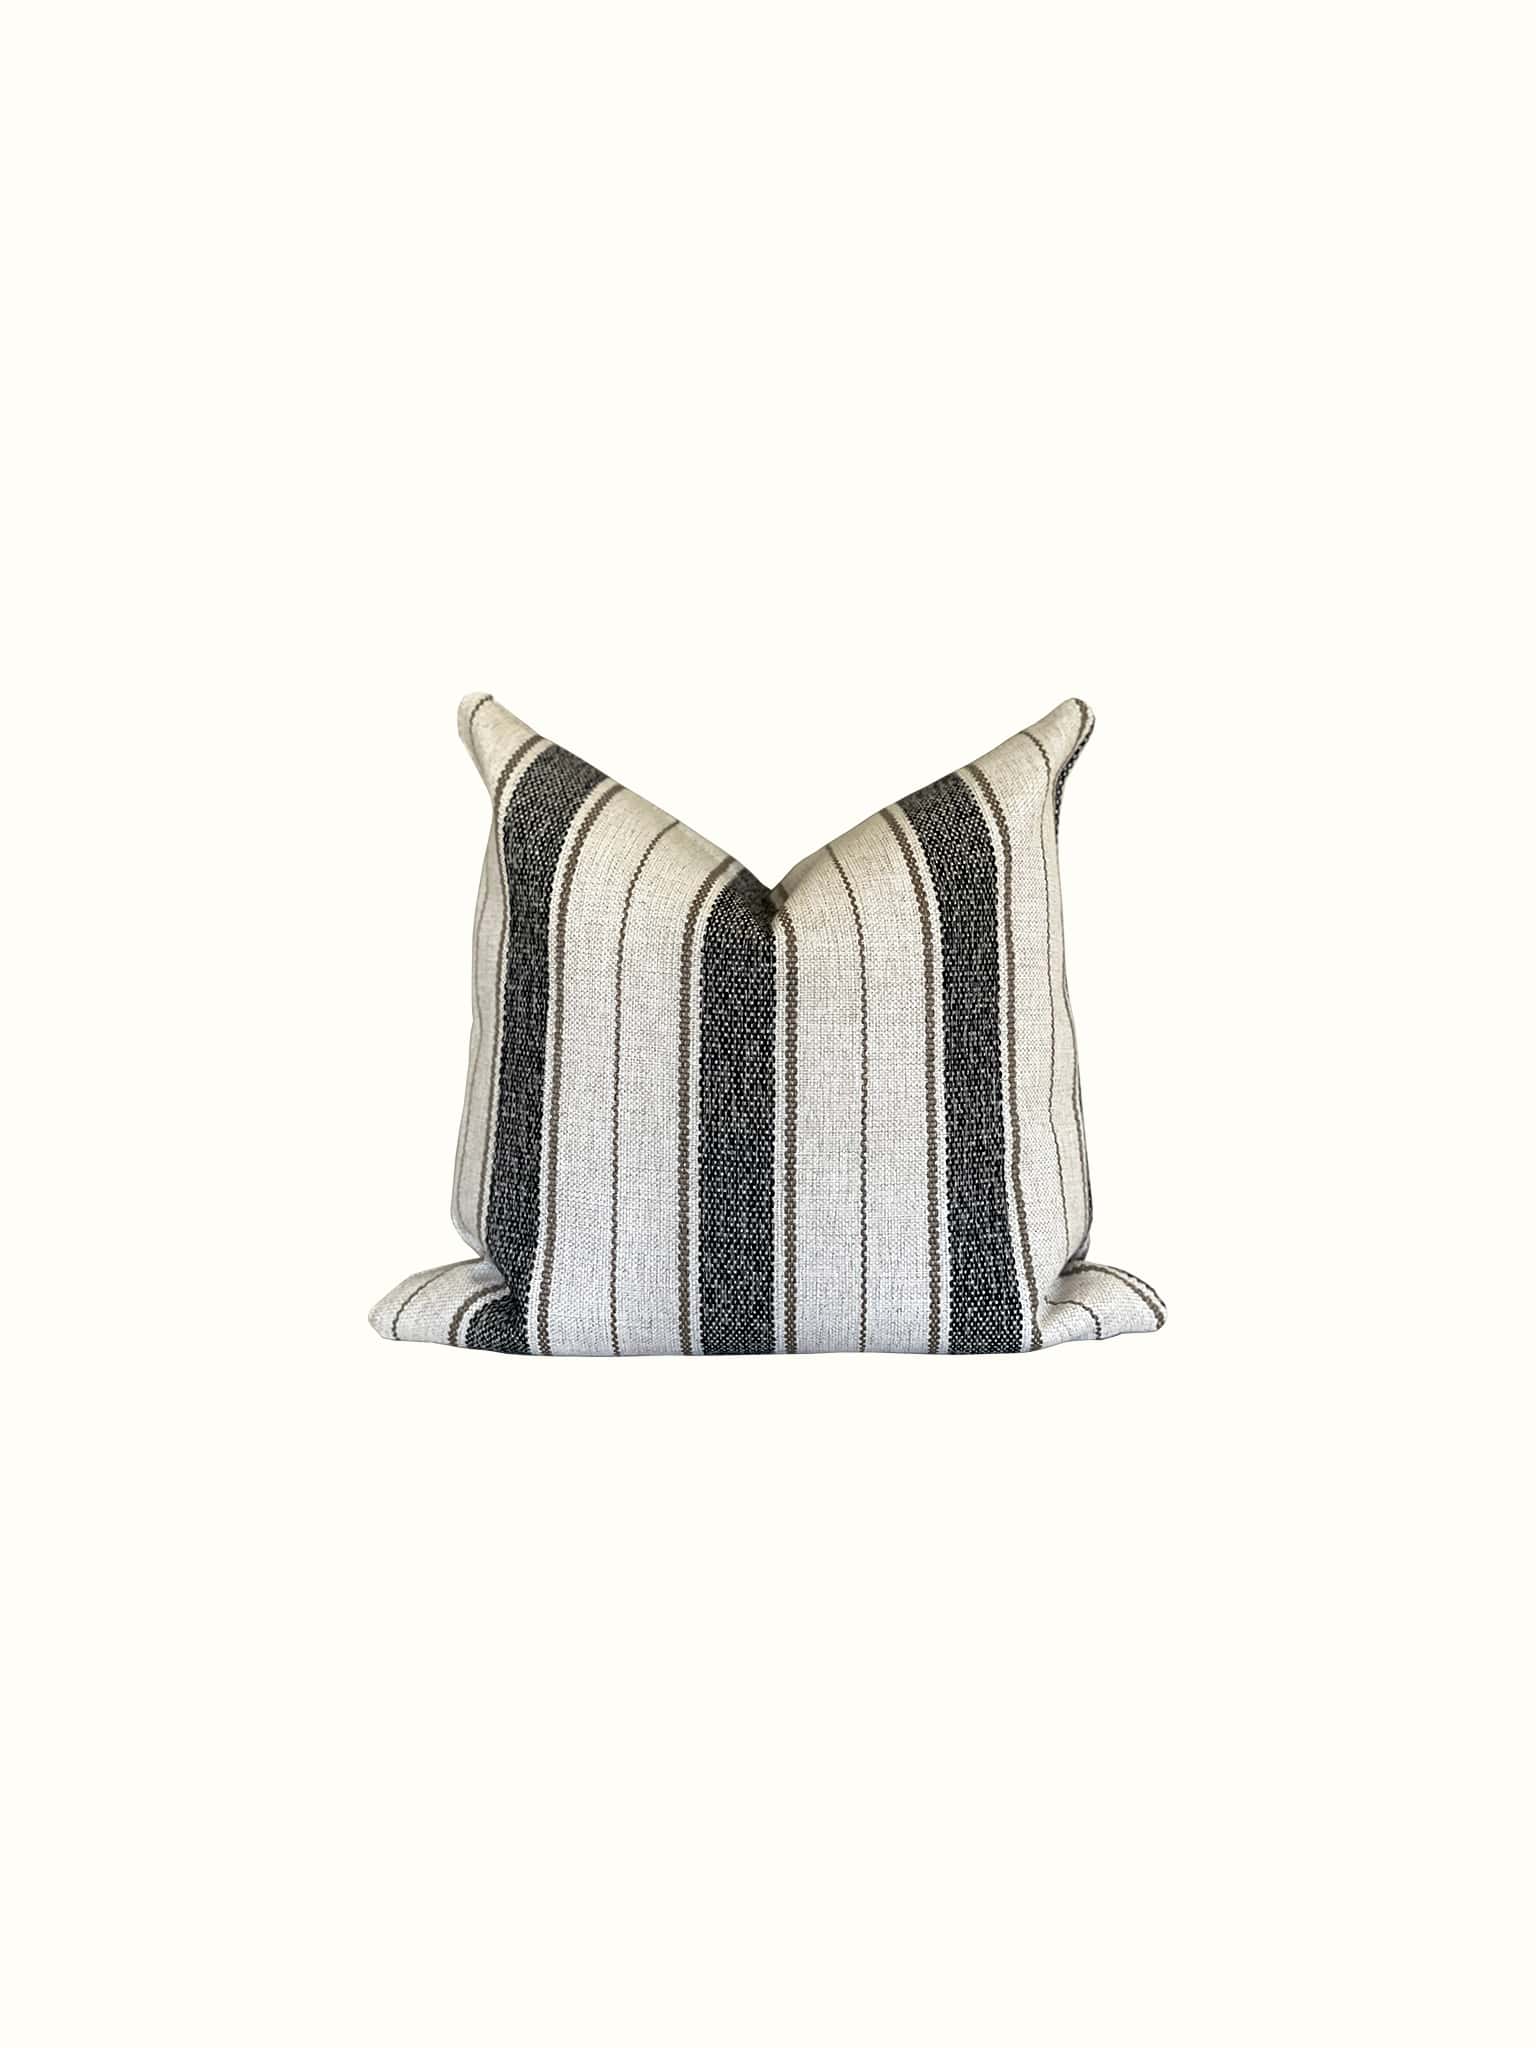 Wide striped throw pillow in black and cream white at Cielle Home